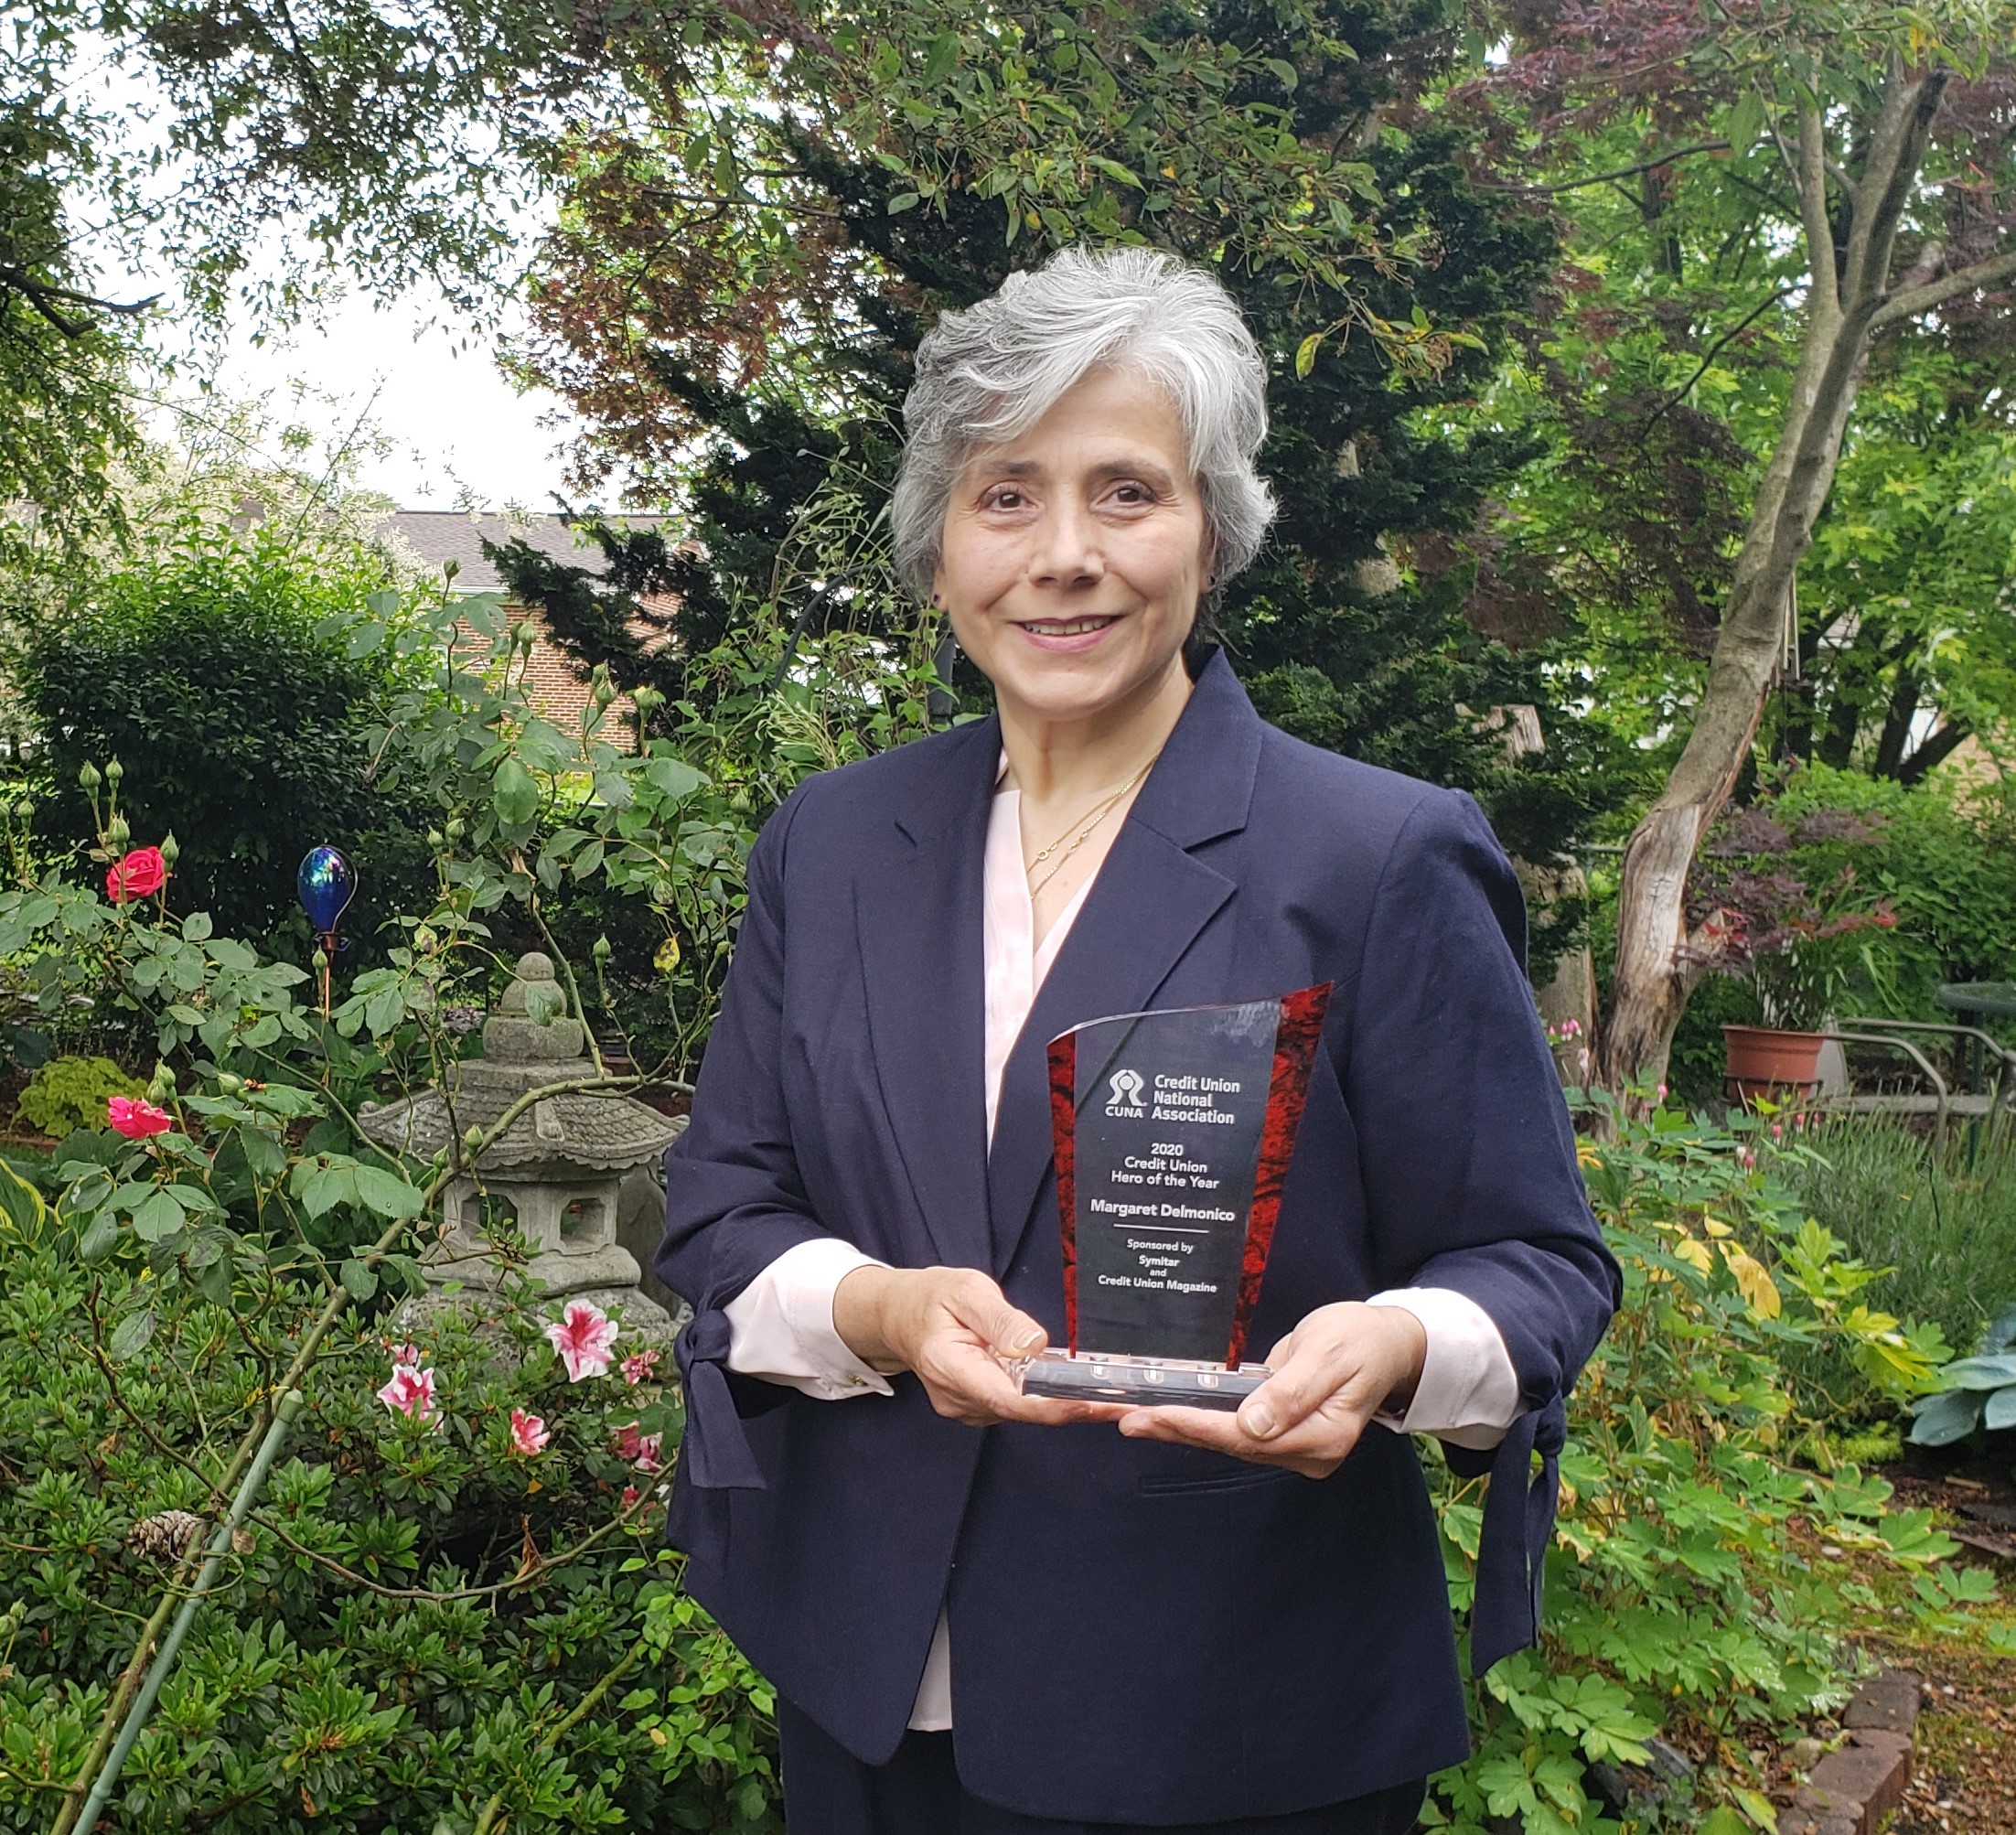 Margaret Delmonico, retired PSECU Director of Public Relations, 
was named the 2020 Credit Union Hero of the Year. 